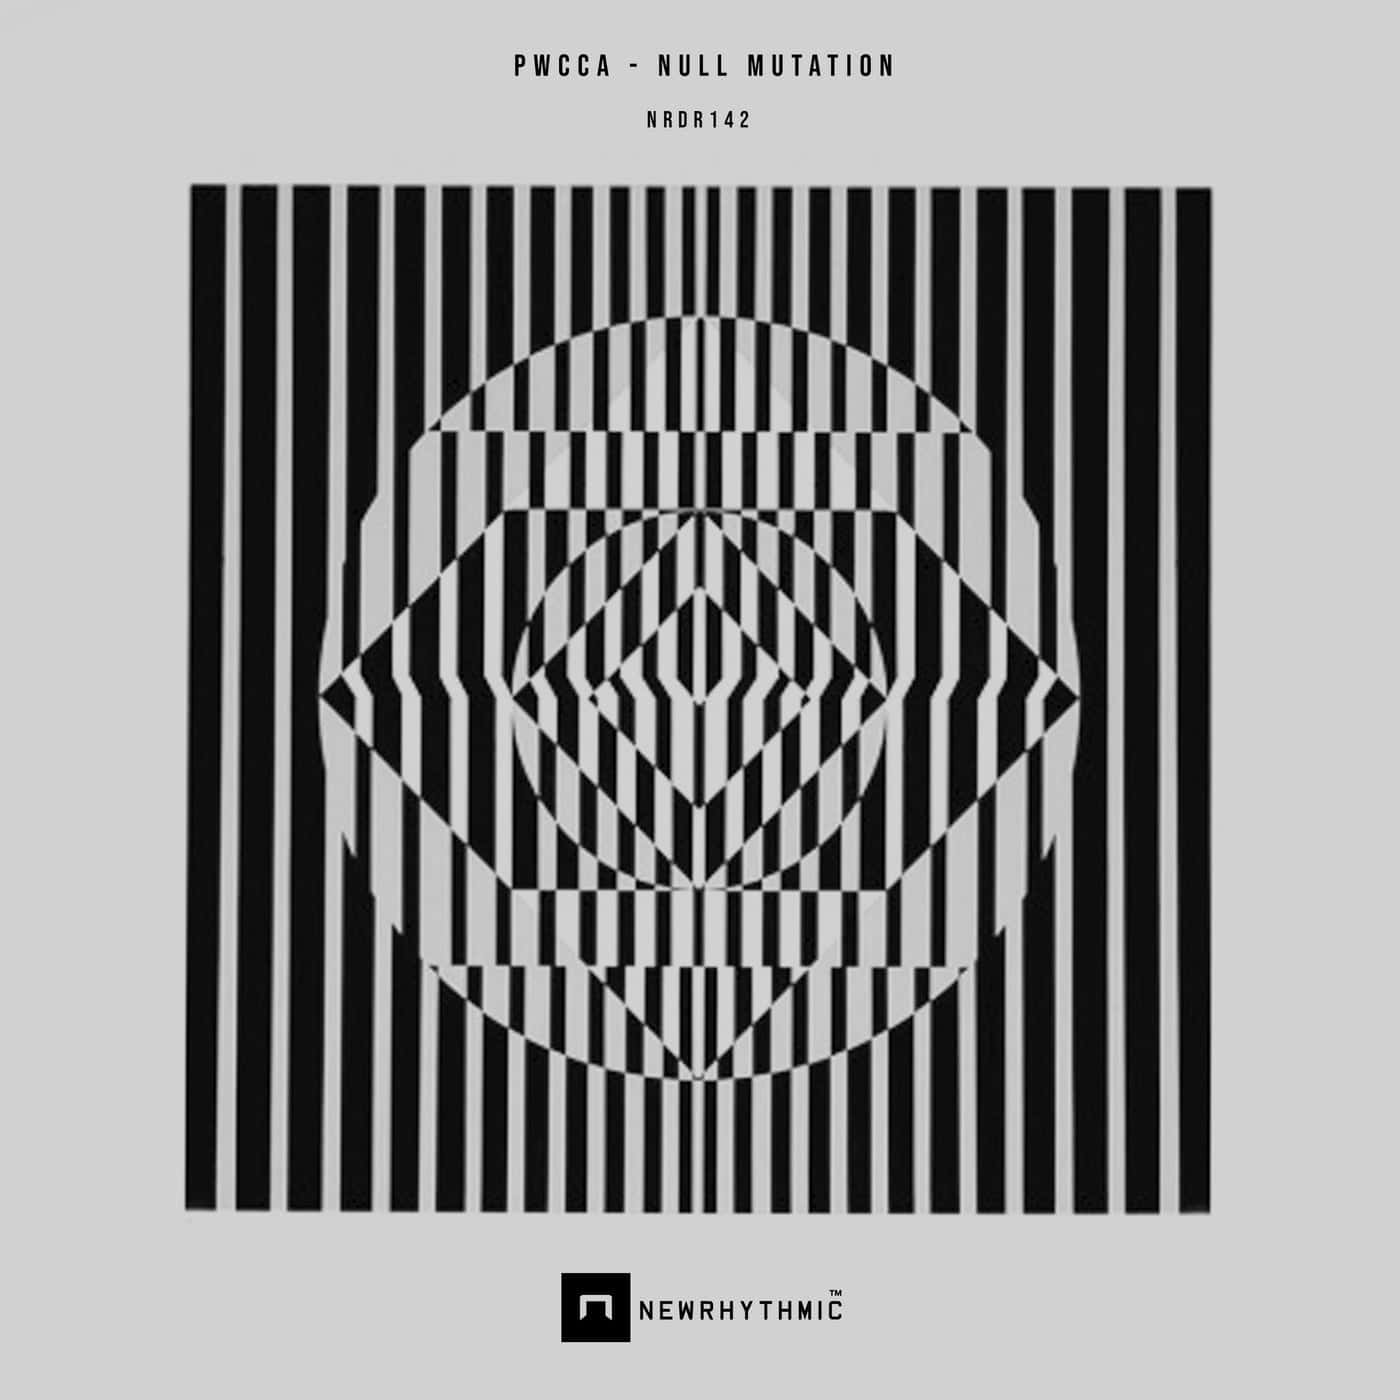 Download PWCCA - NULL MUTATION on Electrobuzz